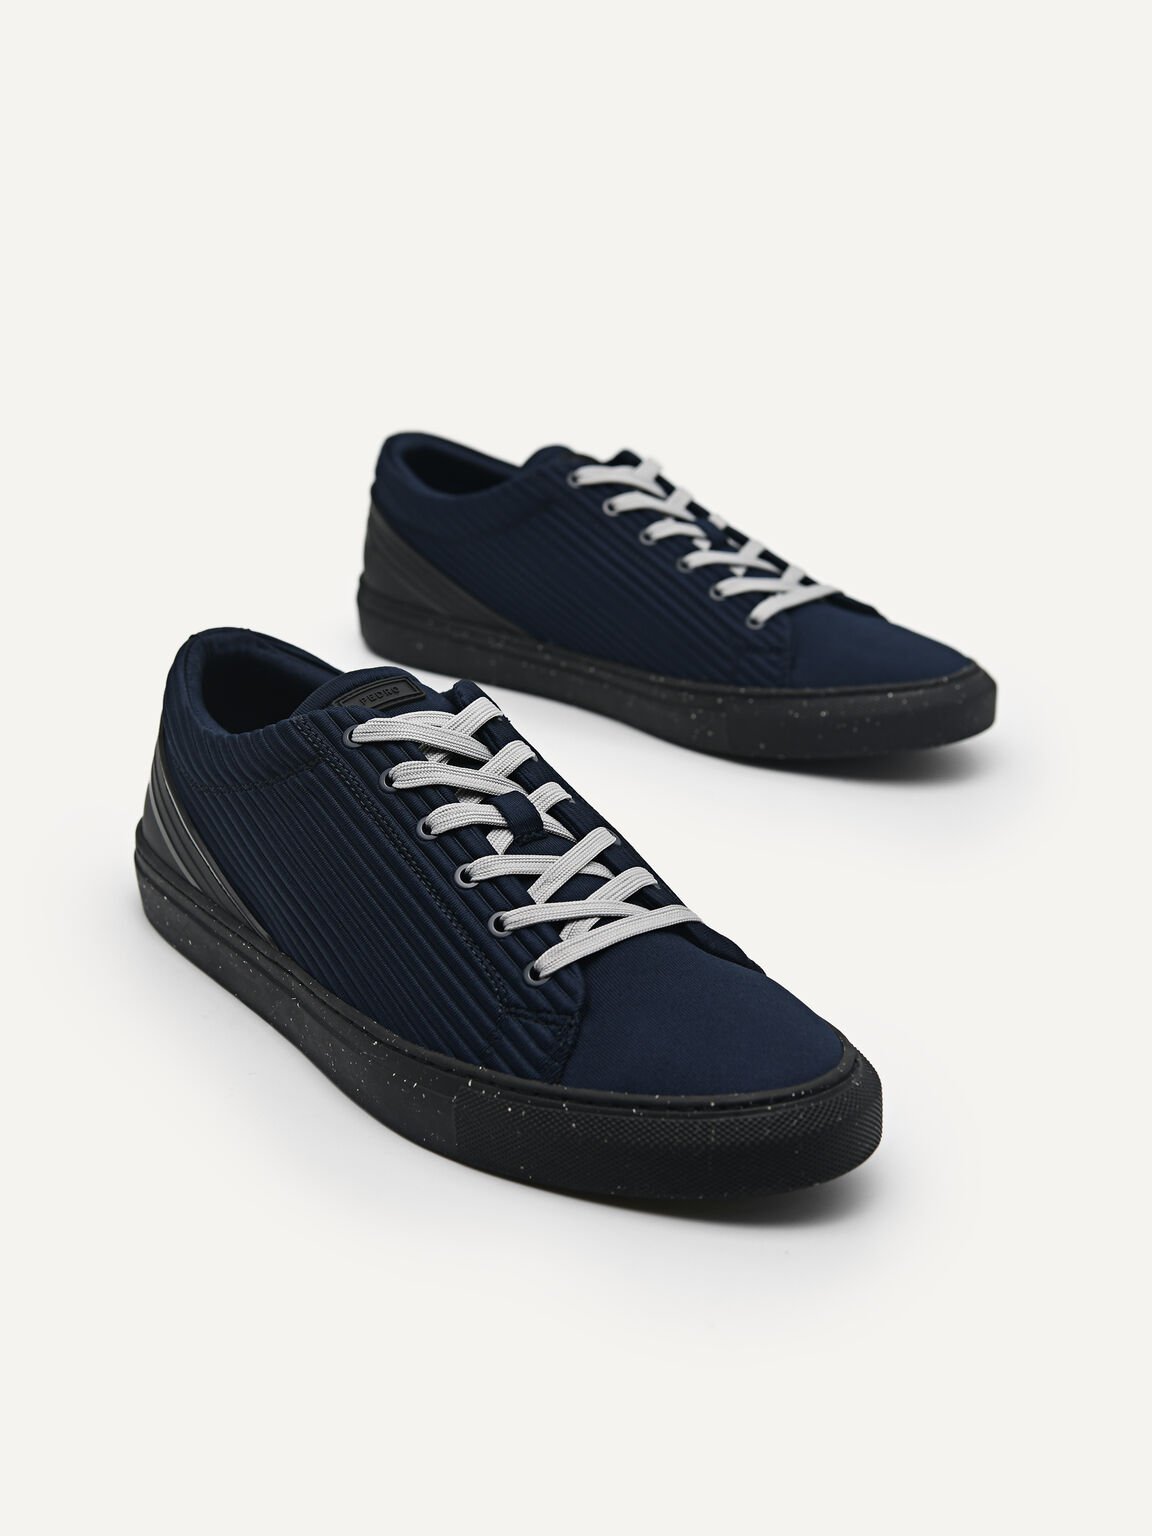 rePEDRO Pleated Sneakers, Navy, hi-res